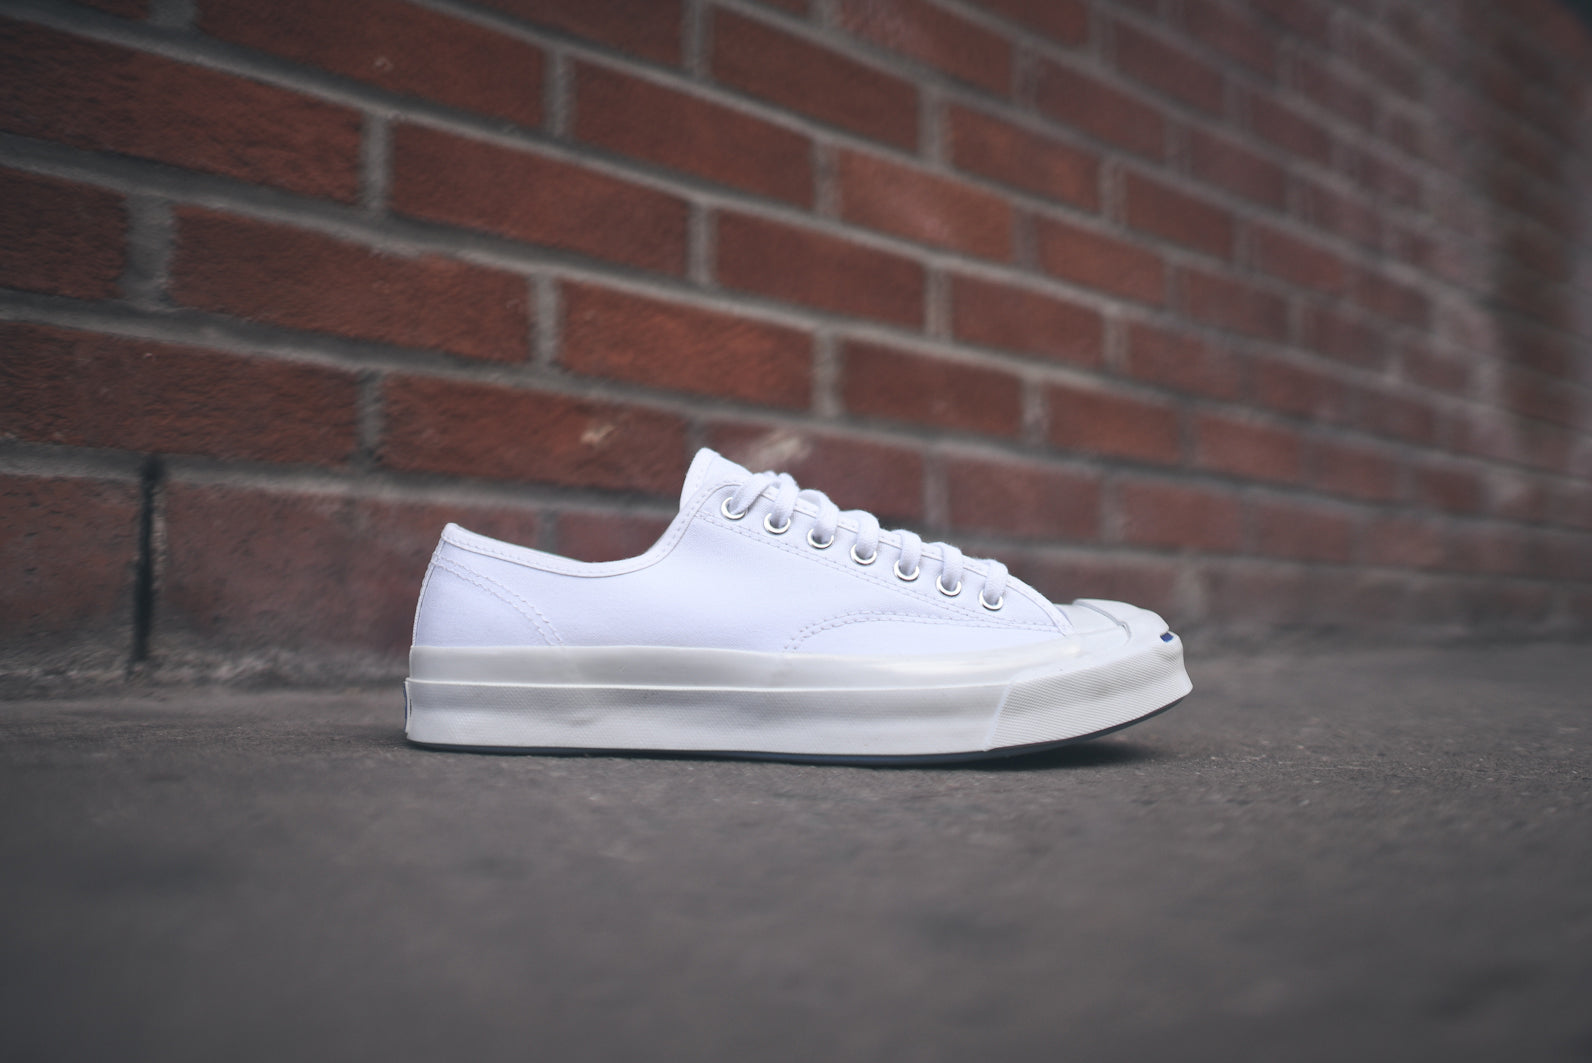 Converse Jack Purcell Signature Pack @ KITH NYC – Kith